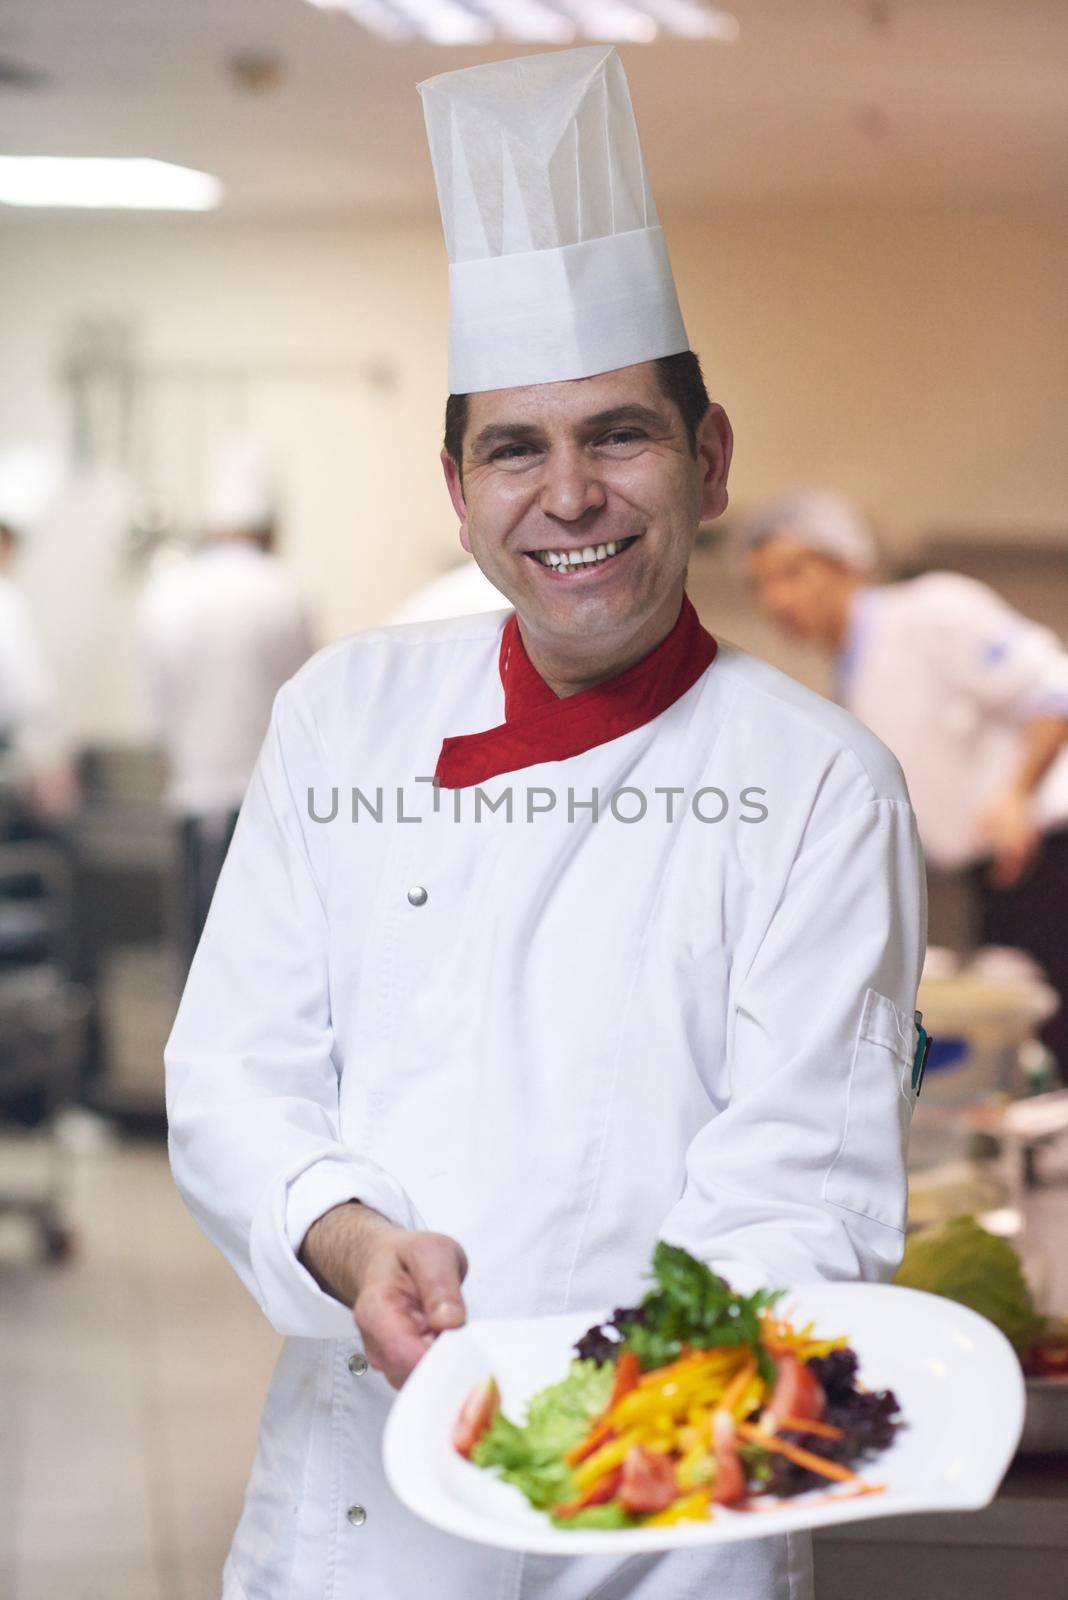 chef in hotel kitchen preparing and decorating food by dotshock